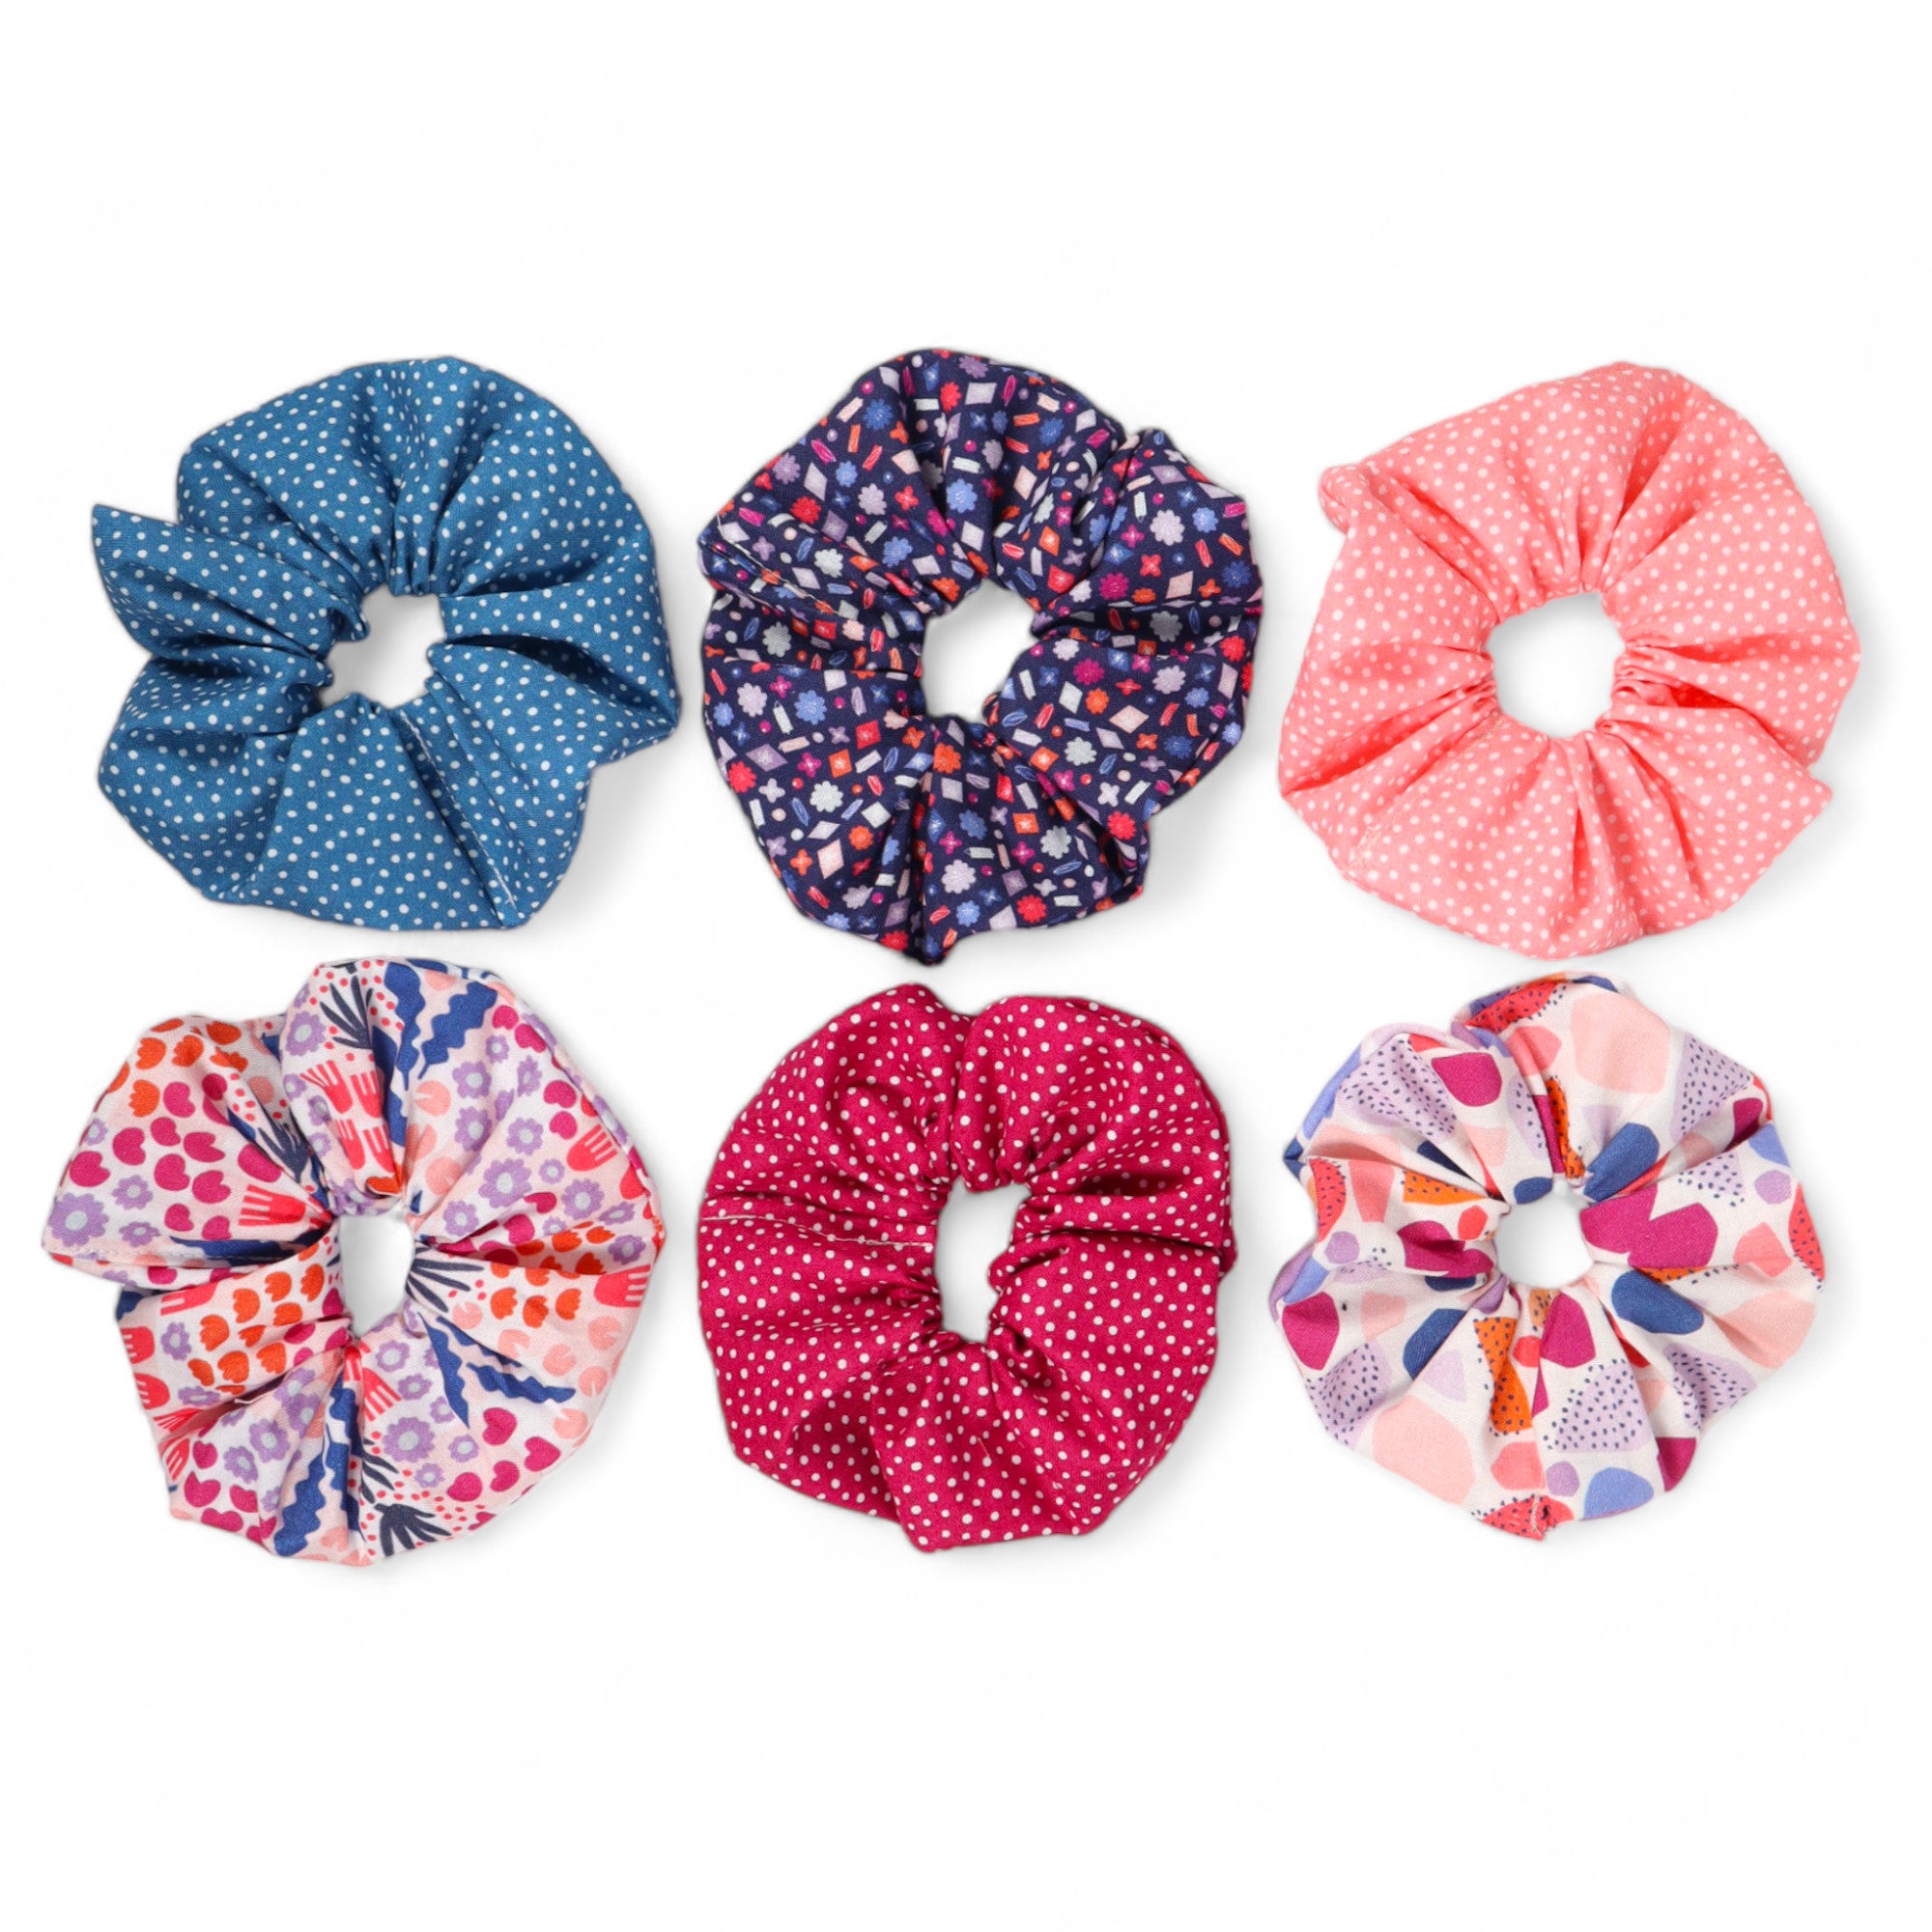 Crosscut Sewing Co. Scrunchie Sewing Kit - Geo Floral